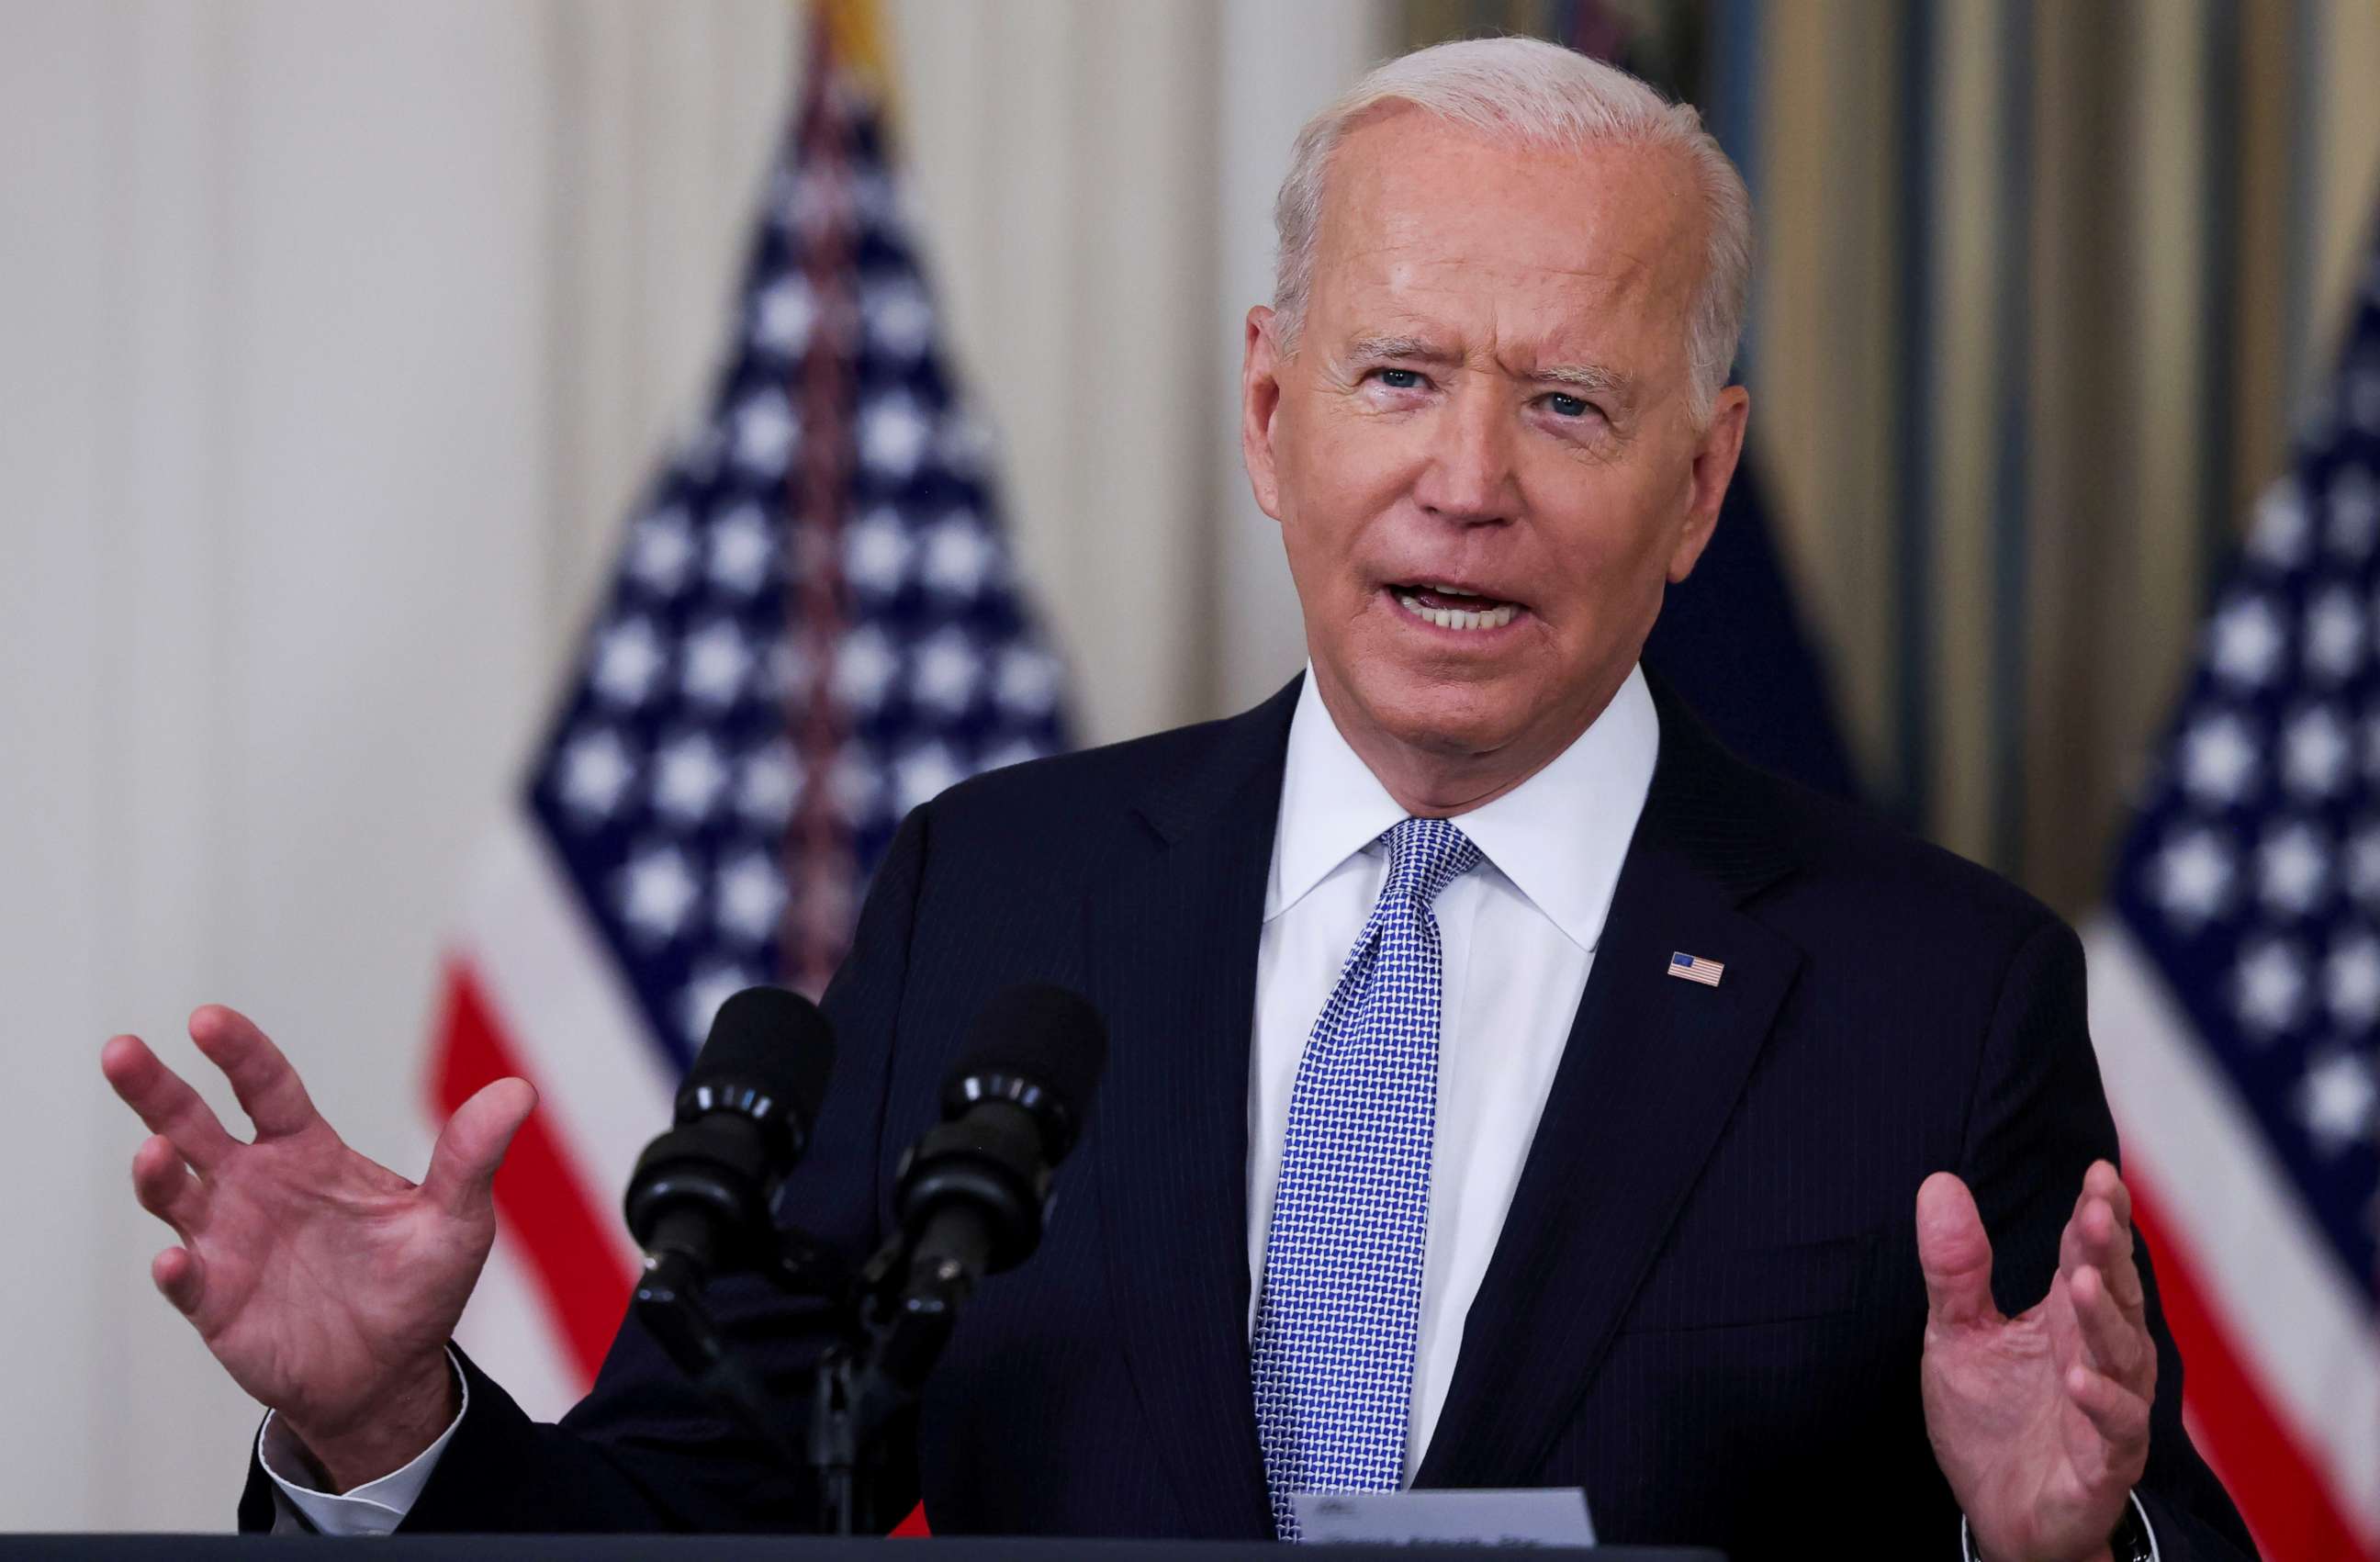 PHOTO: President Joe Biden responds to a question from a reporter after speaking about coronavirus disease (COVID-19) vaccines and booster shots in the State Dining Room at the White House in Washington, Sept. 24, 2021.